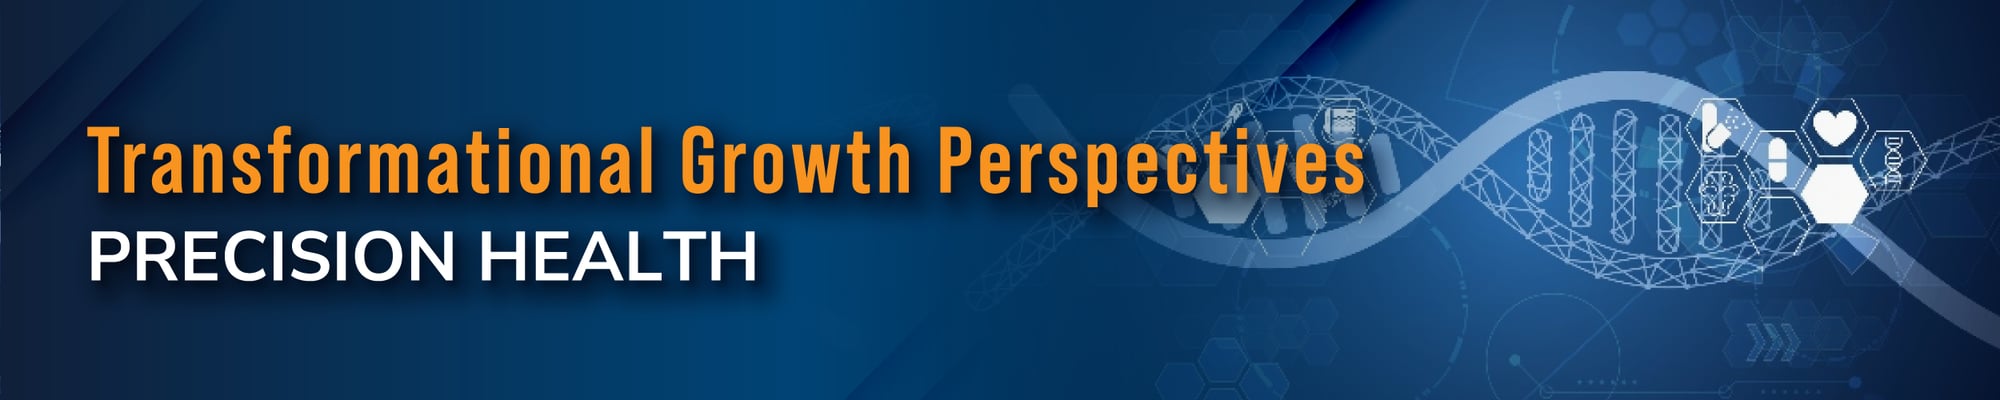 Top Growth Opportunities in Precision Health